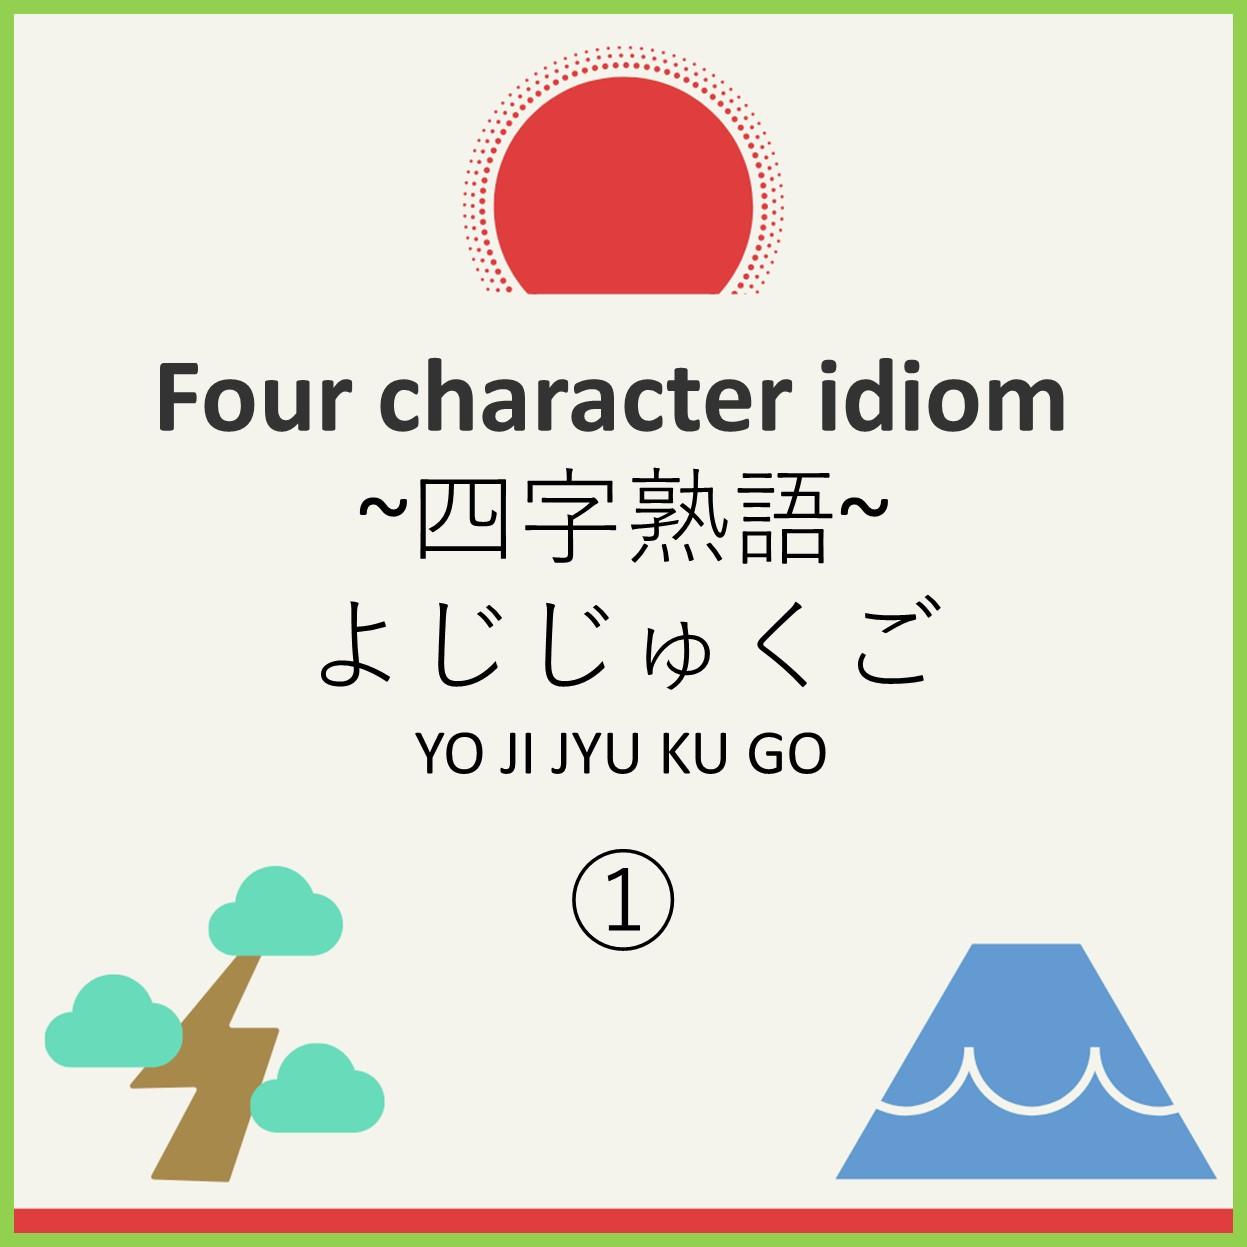 Four character idiom